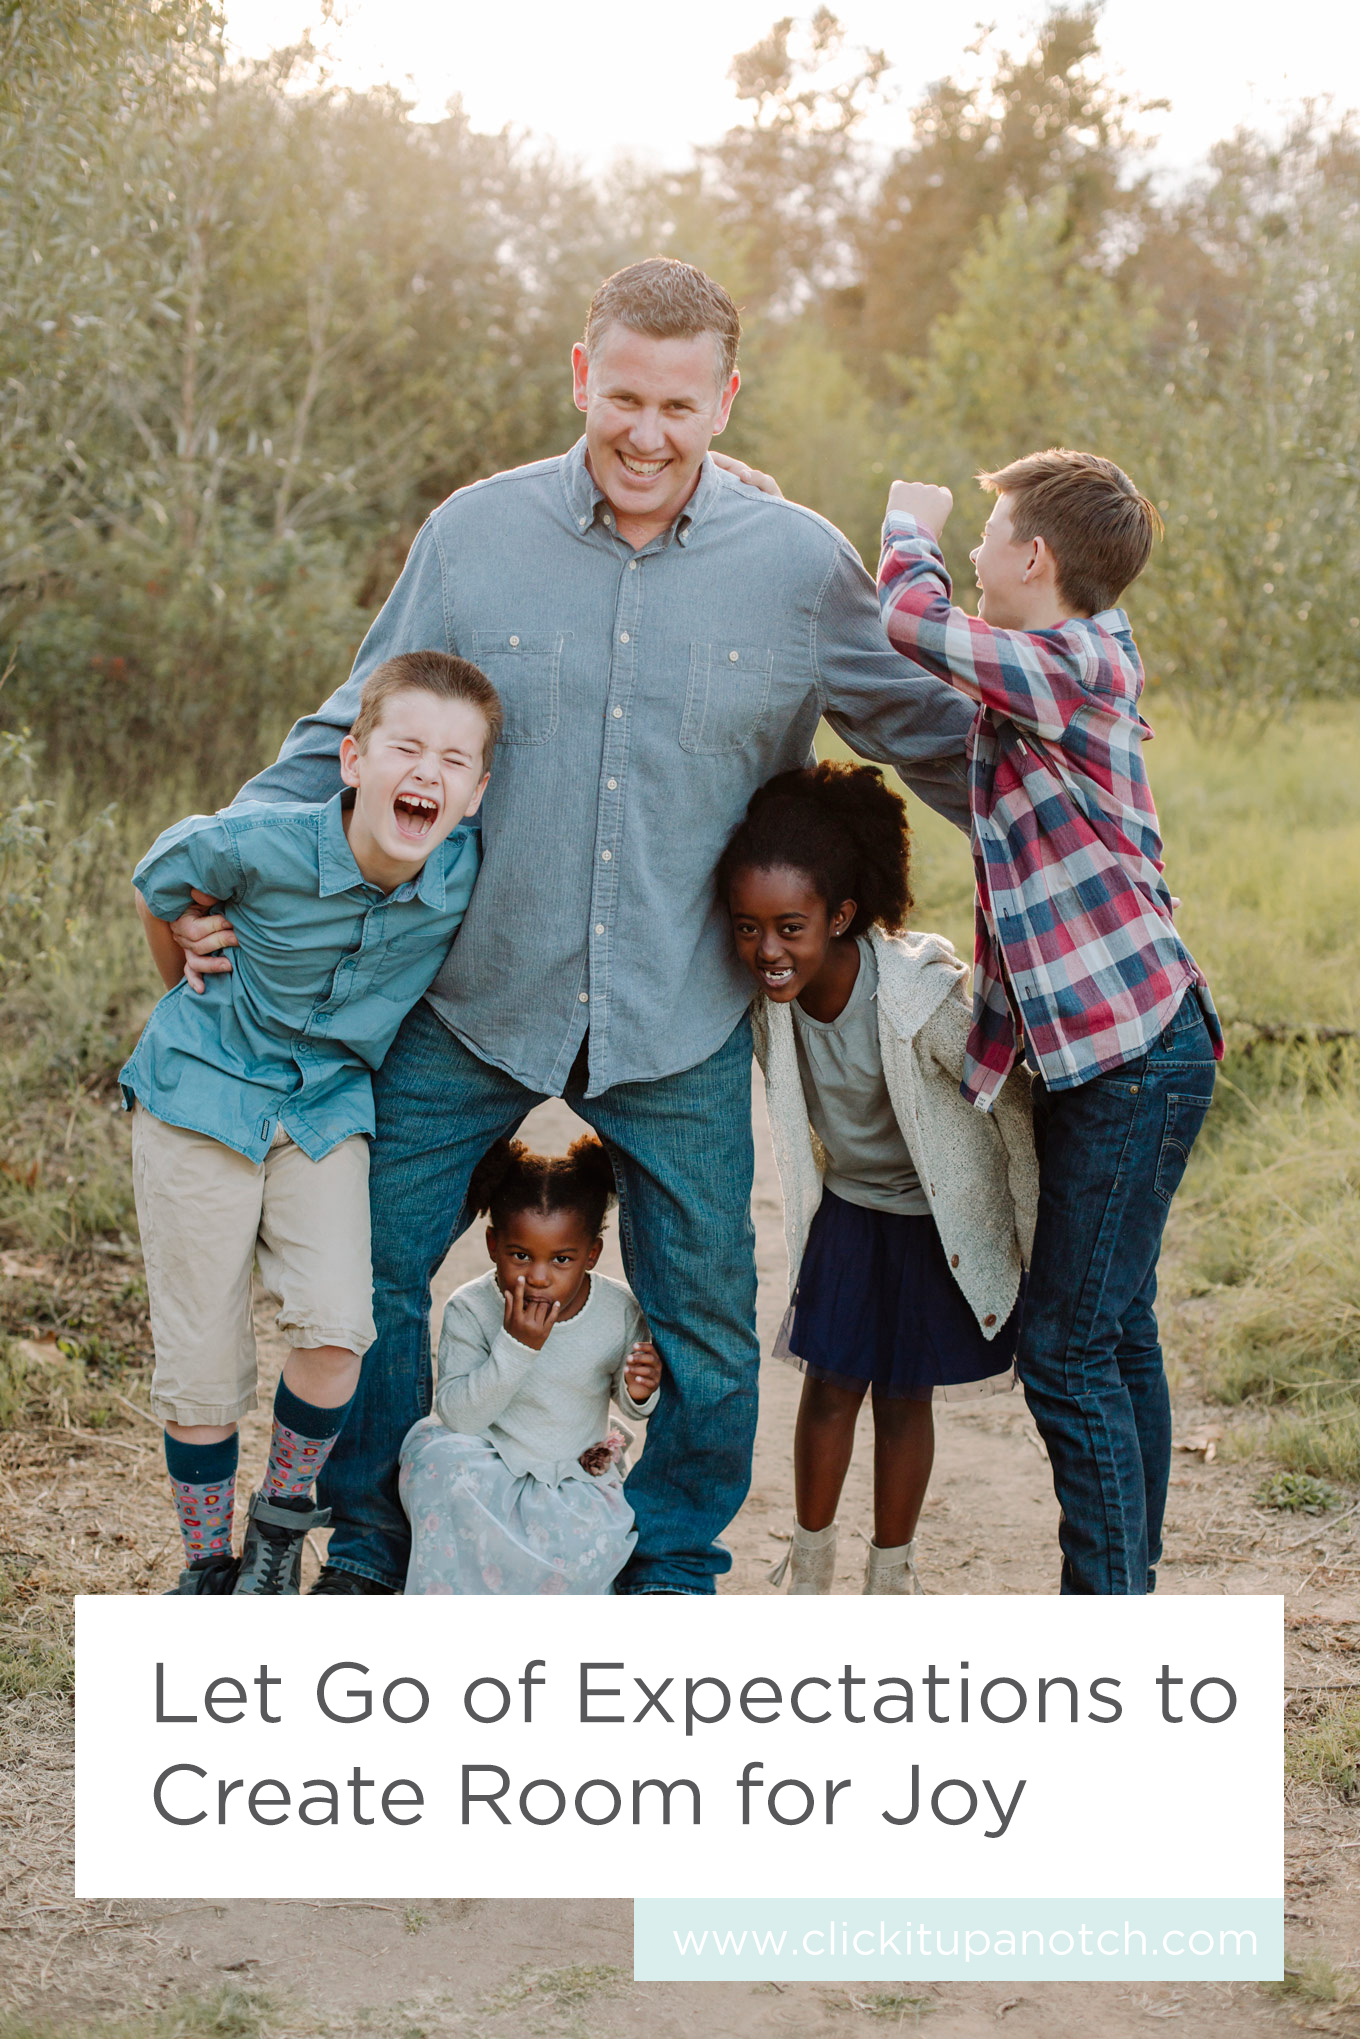 I absolutely love all her suggestions! I'm going to try this right away! Read - "Let Go of Expectations to Create Room for Joy"